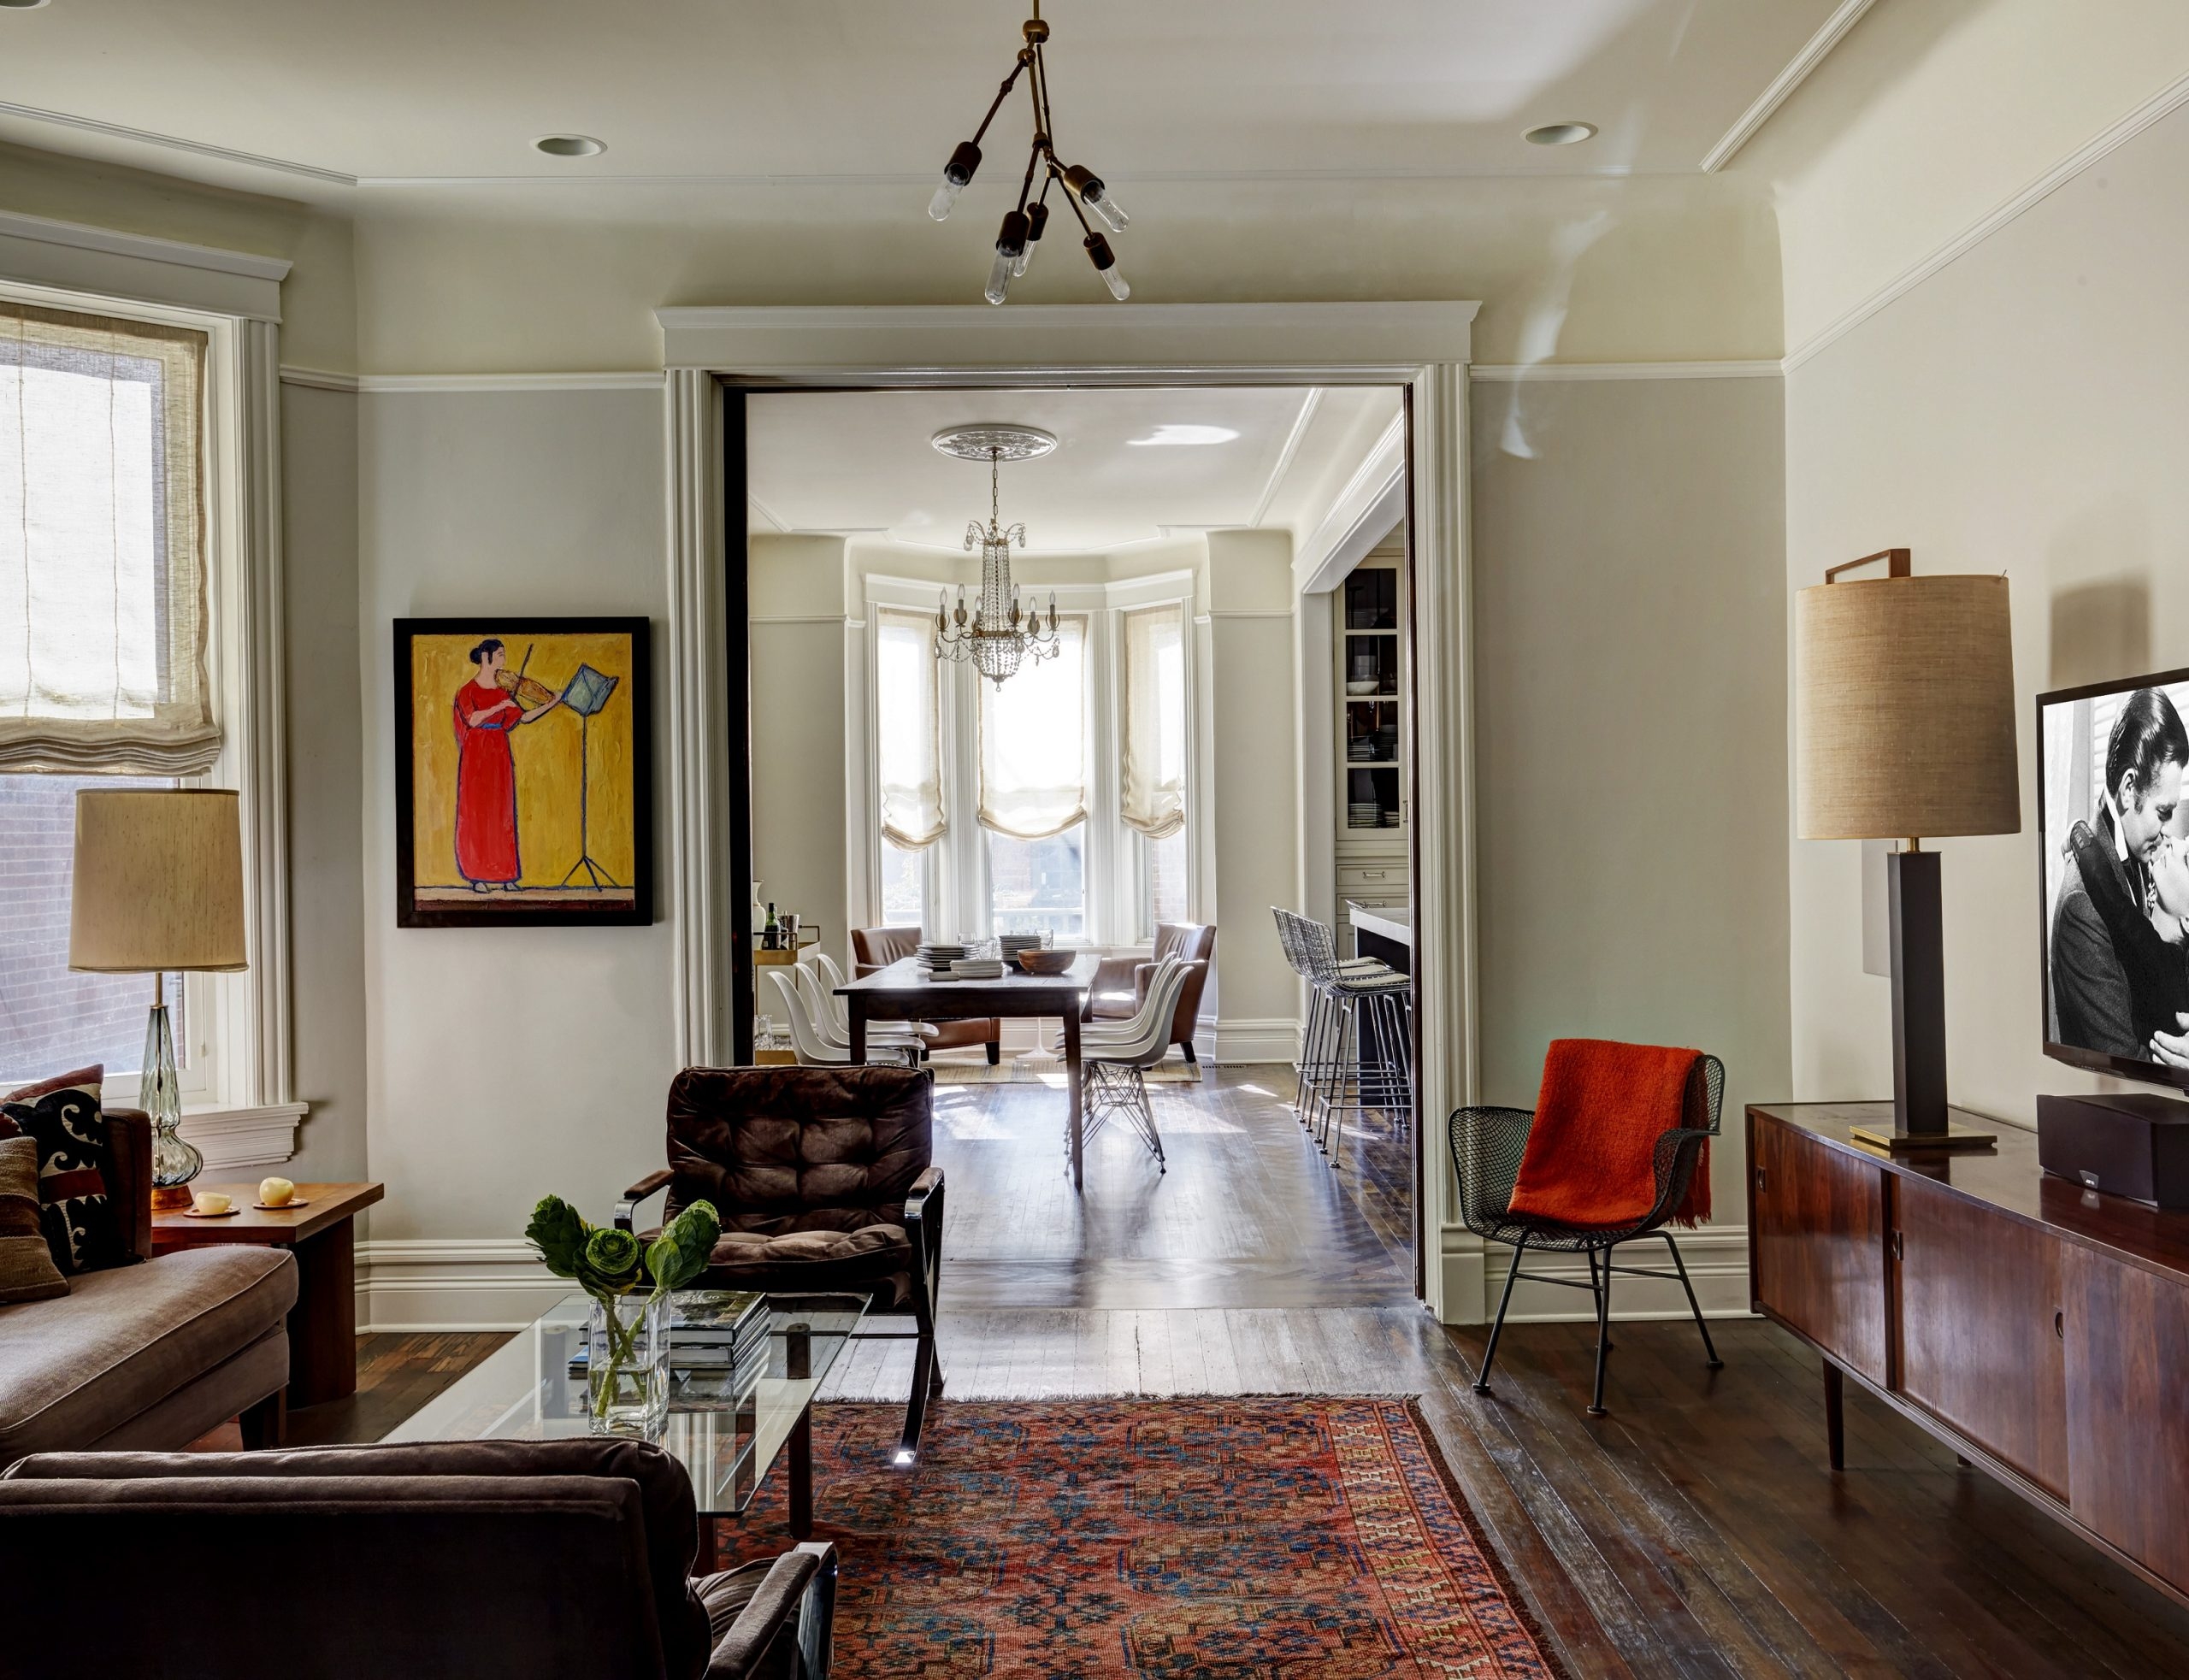 Making sense of Victorian house space